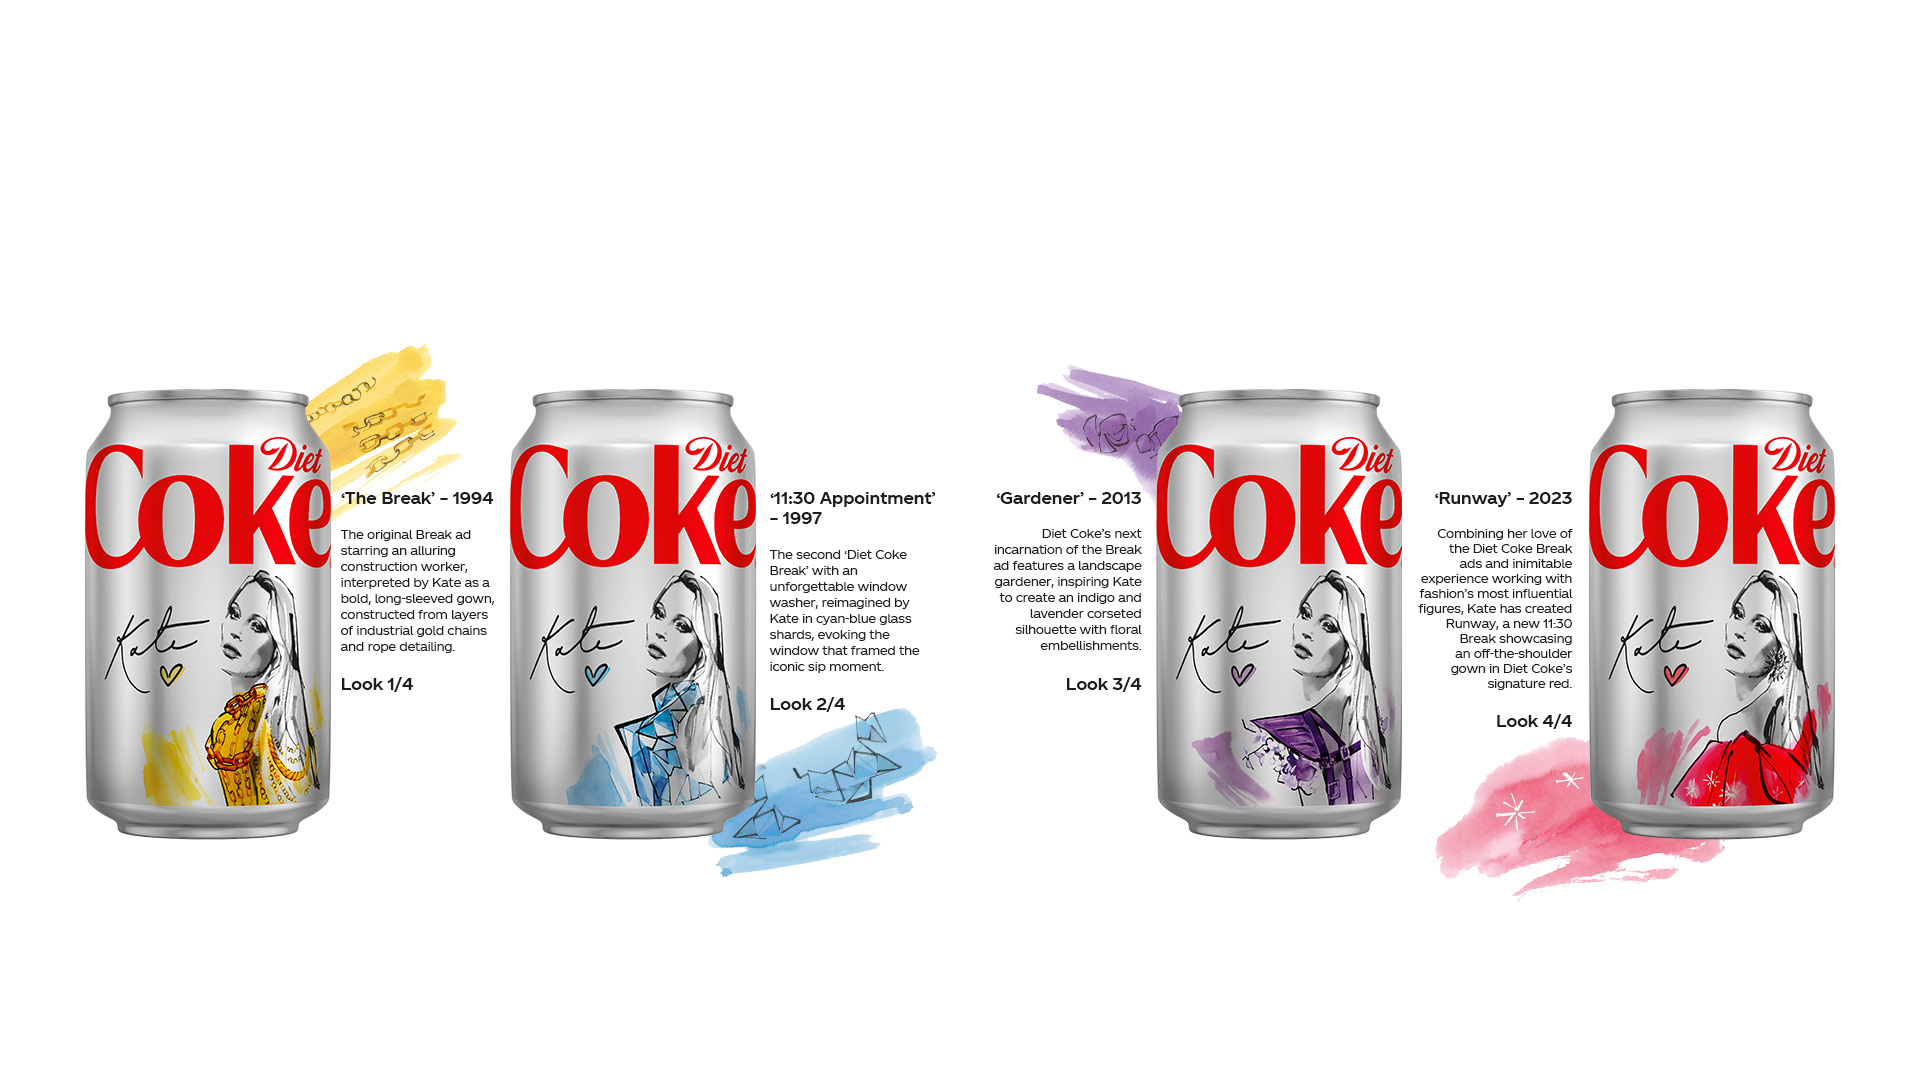 Diet Coke x Kate Moss Latest Campaigns CocaCola GB